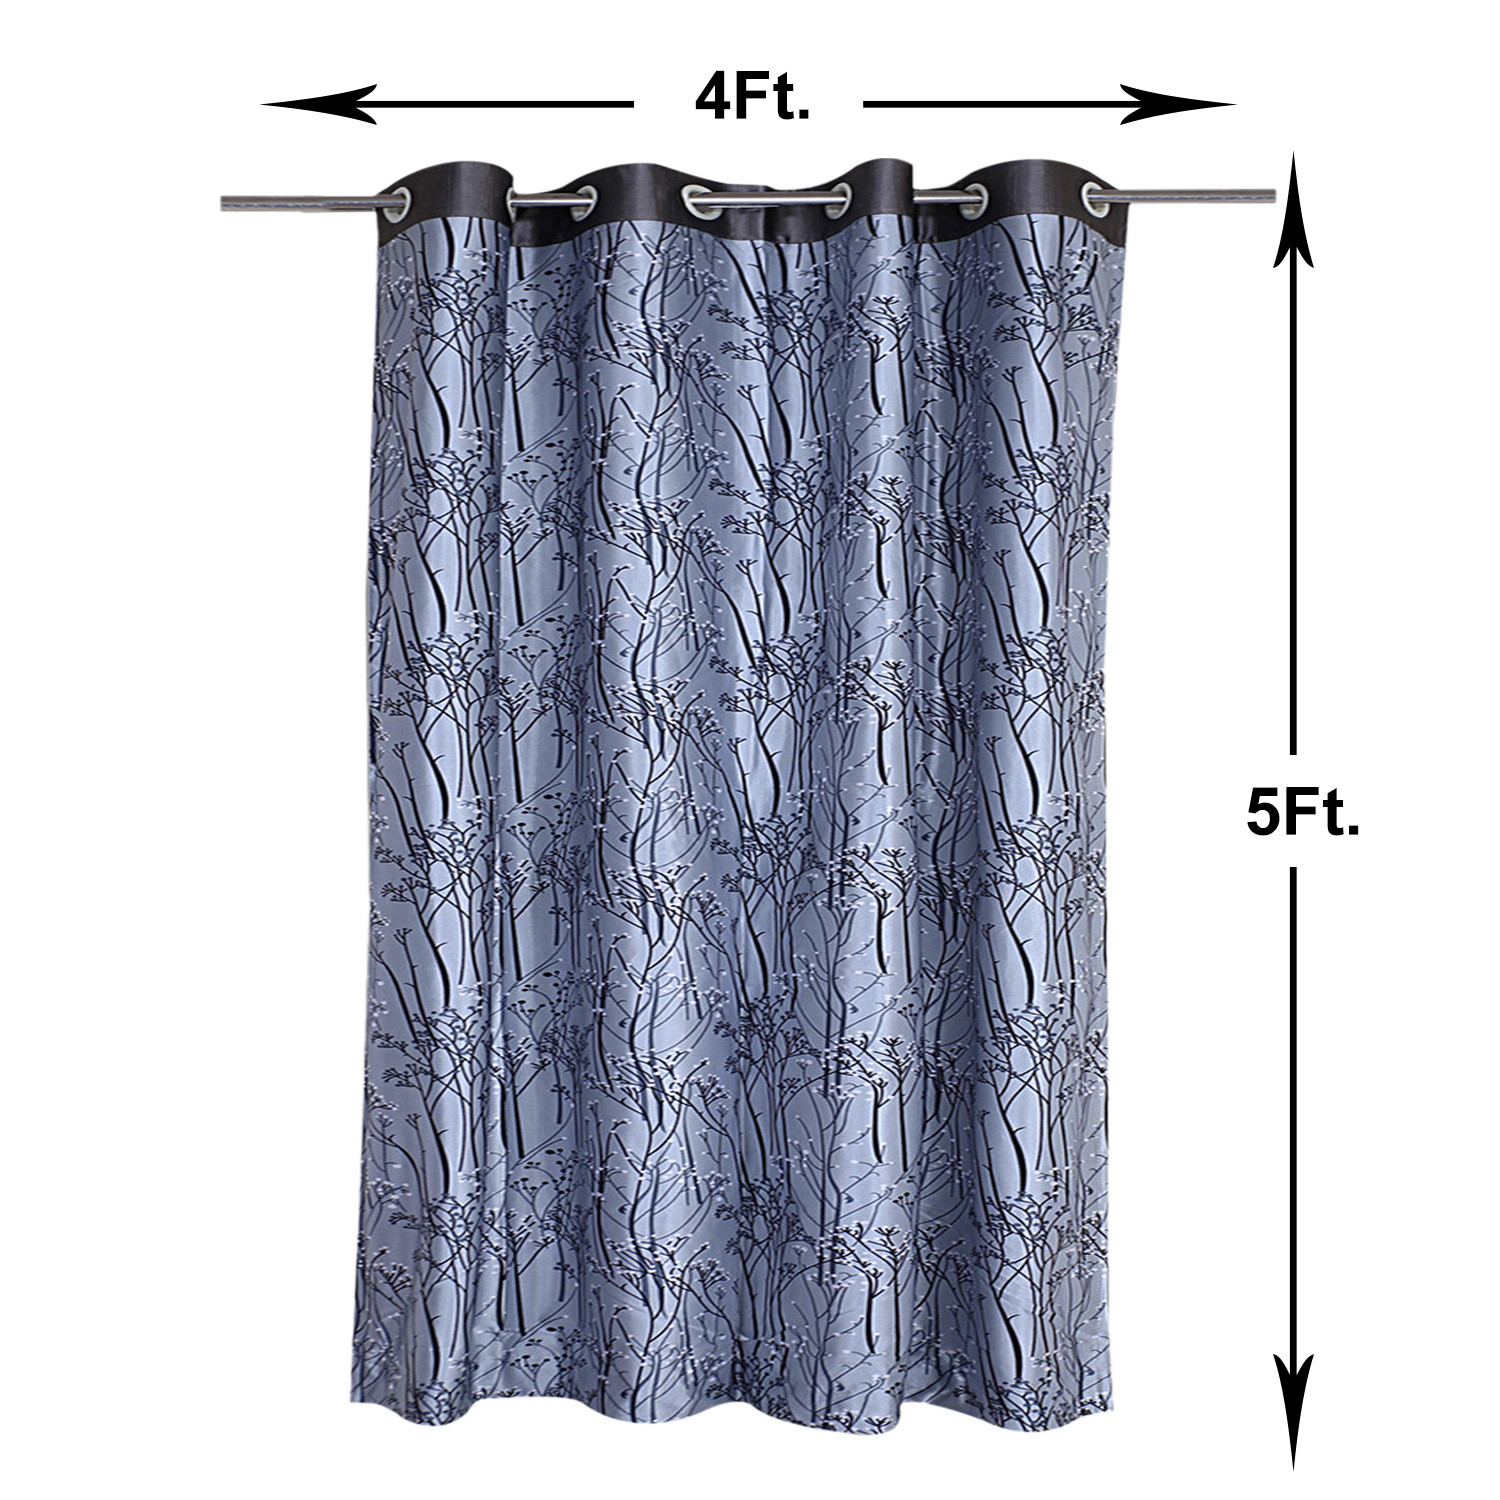 Kuber Industries Polyester Decorative 5 Feet Window Curtain|Tree Branches Print Darkening Blackout|Drapes Curatin With 8 Eyelet For Home & Office (Gray)